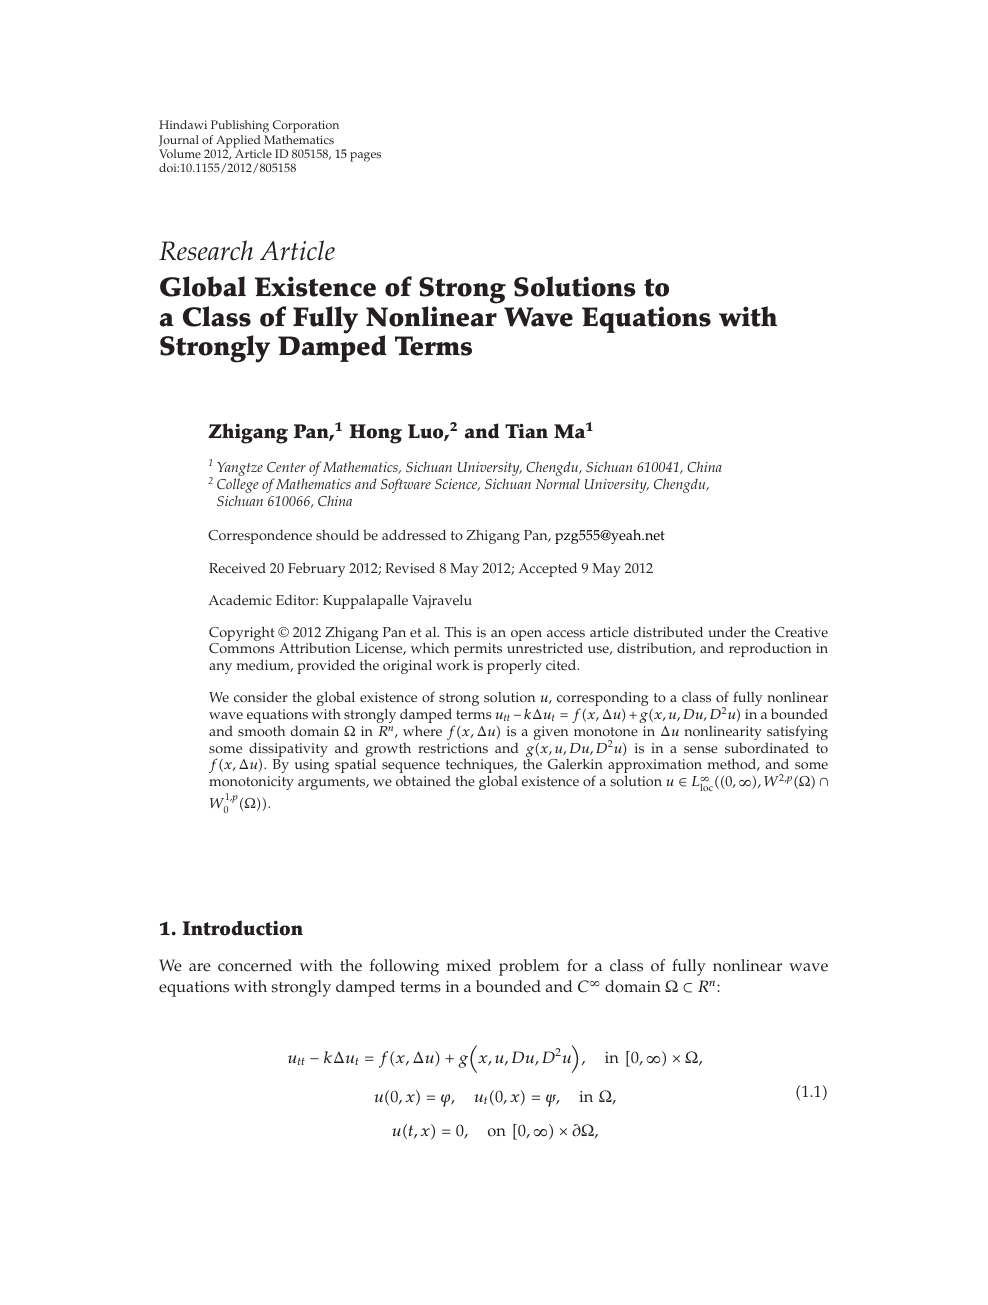 Global Existence Of Strong Solutions To A Class Of Fully Nonlinear Wave Equations With Strongly Damped Terms Topic Of Research Paper In Mathematics Download Scholarly Article Pdf And Read For Free